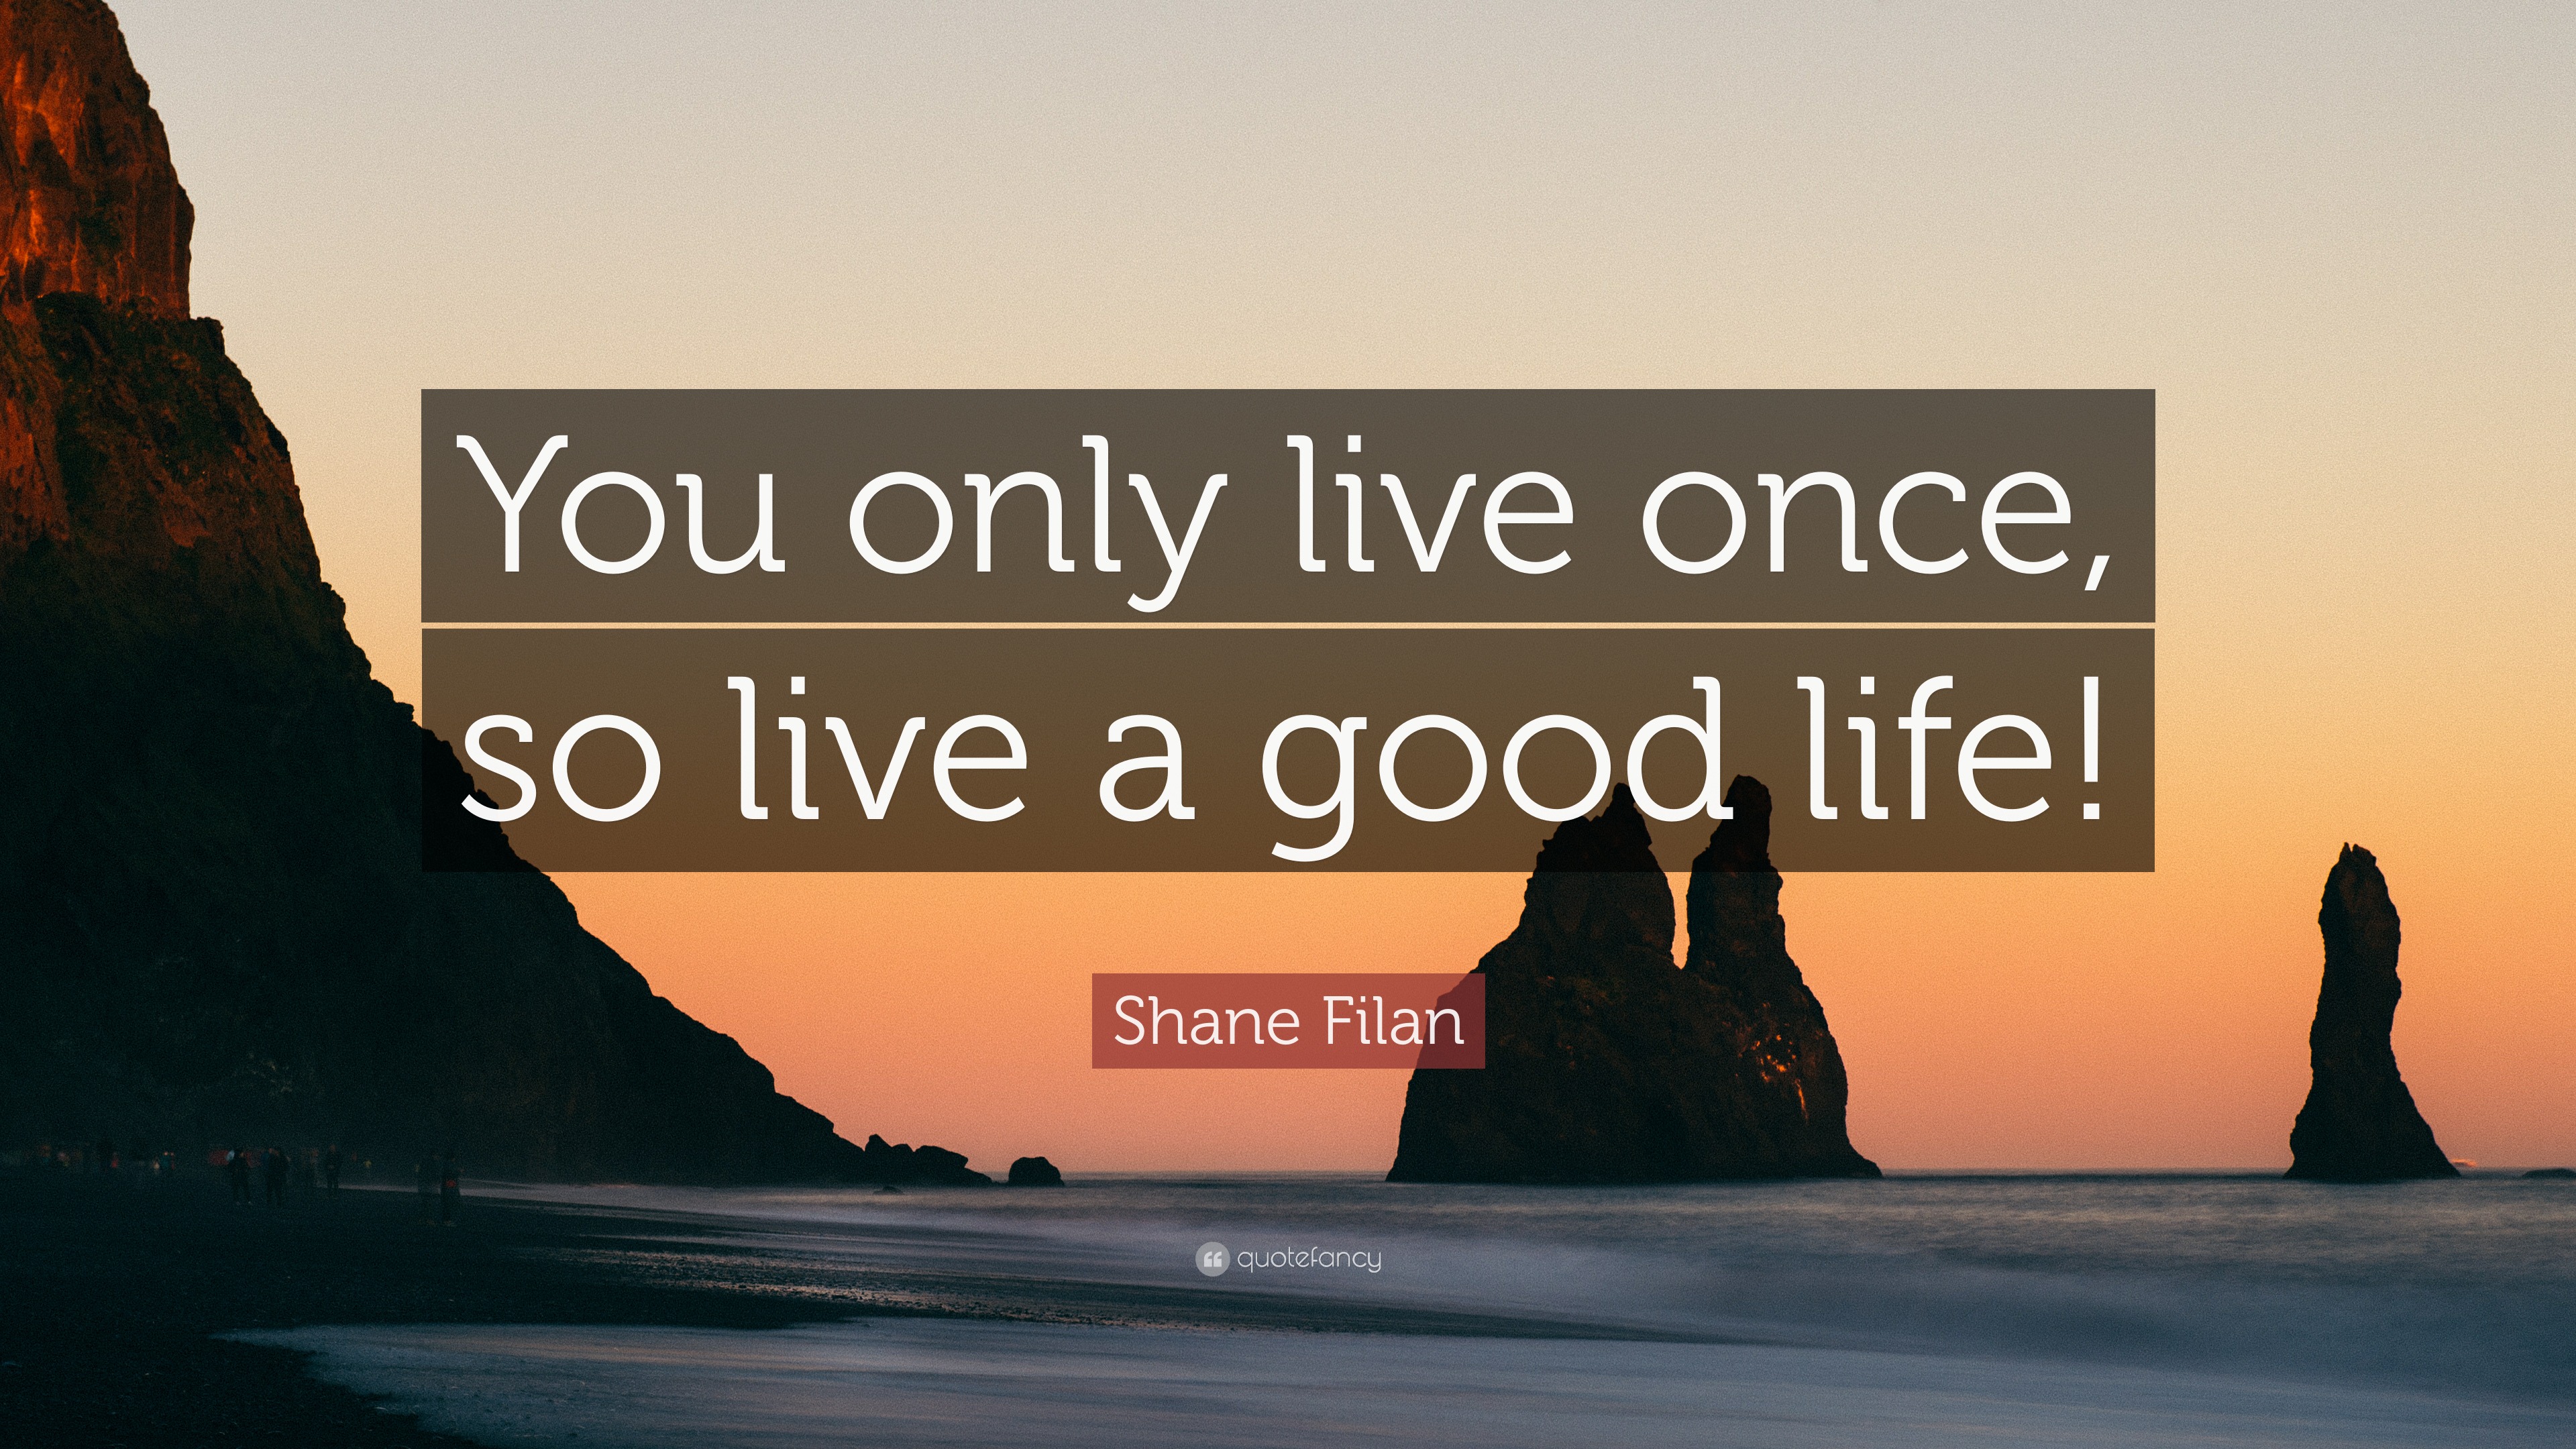 Shane Filan Quote “You only live once so live a good life